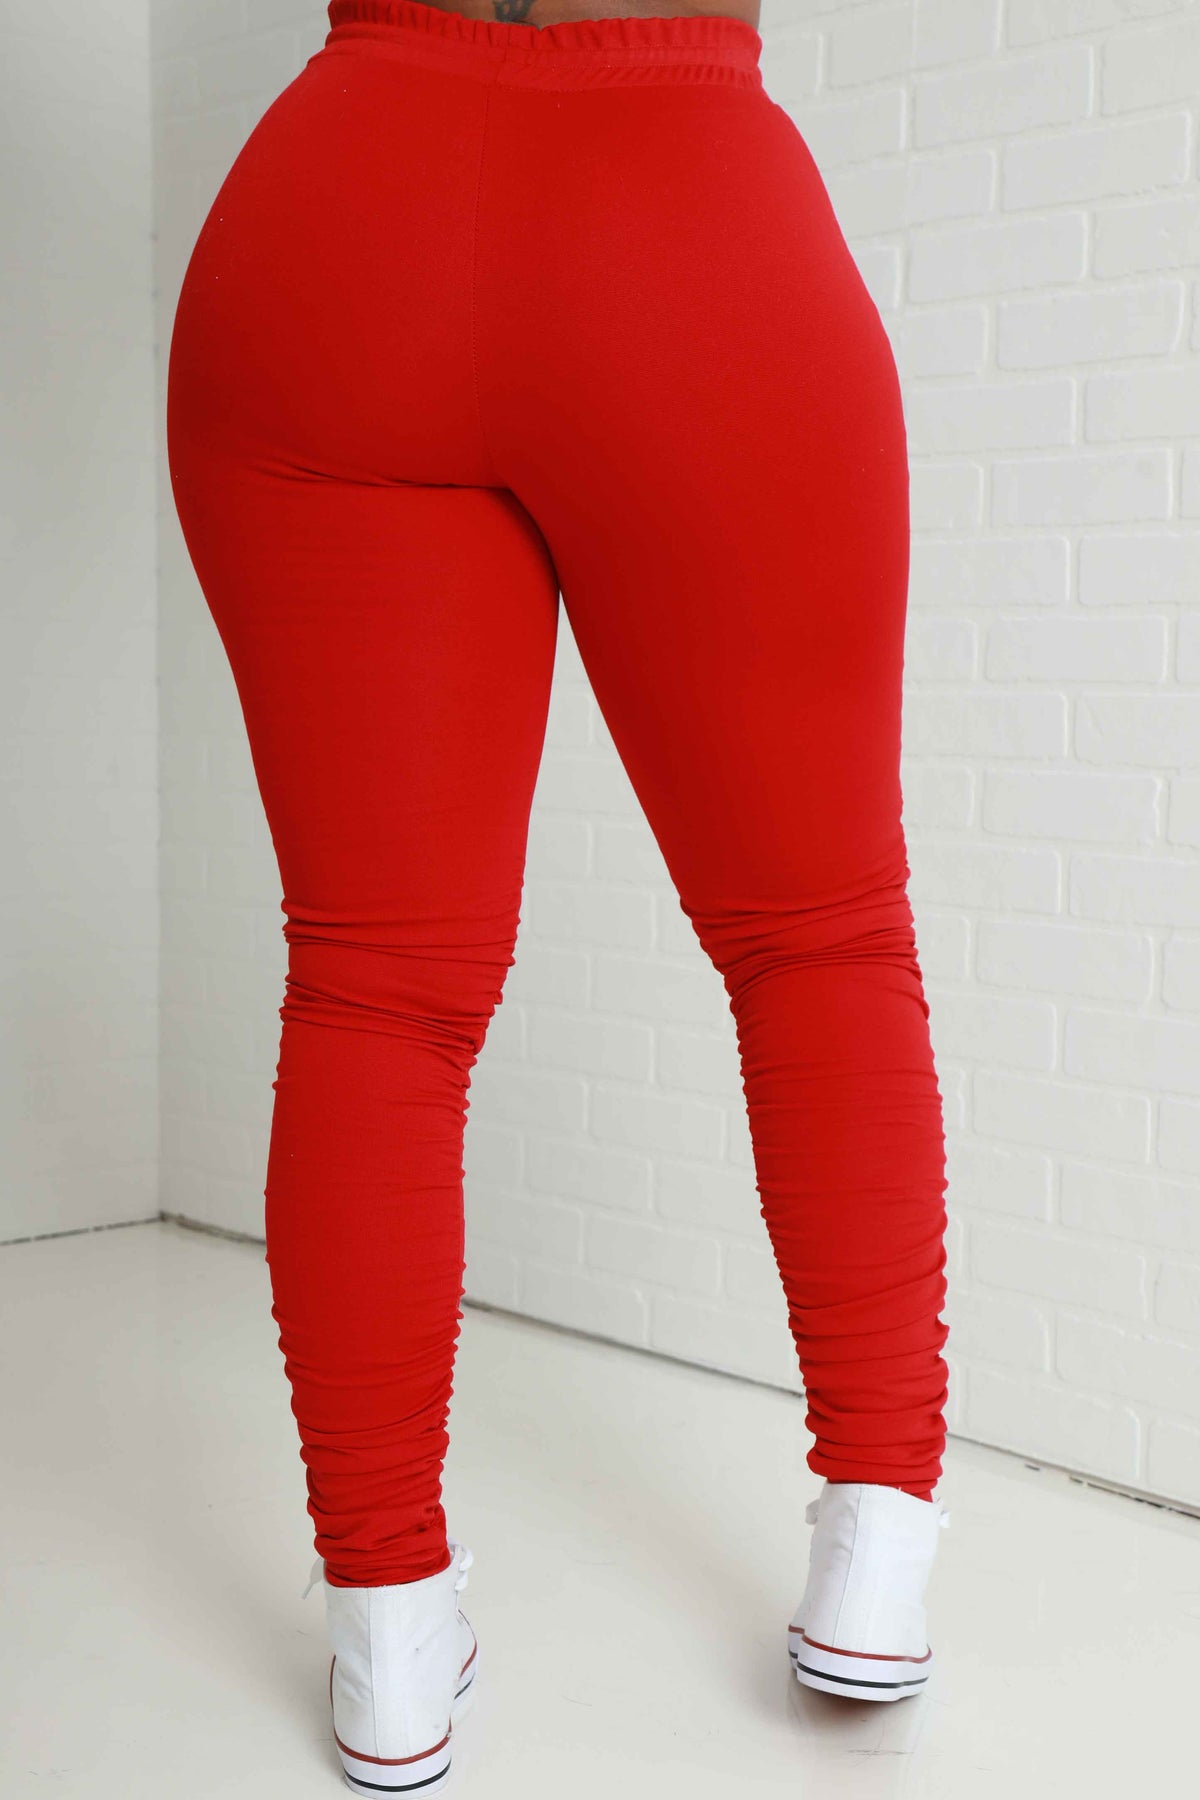 
              Now Or Never Ruched Leggings - Red - Swank A Posh
            